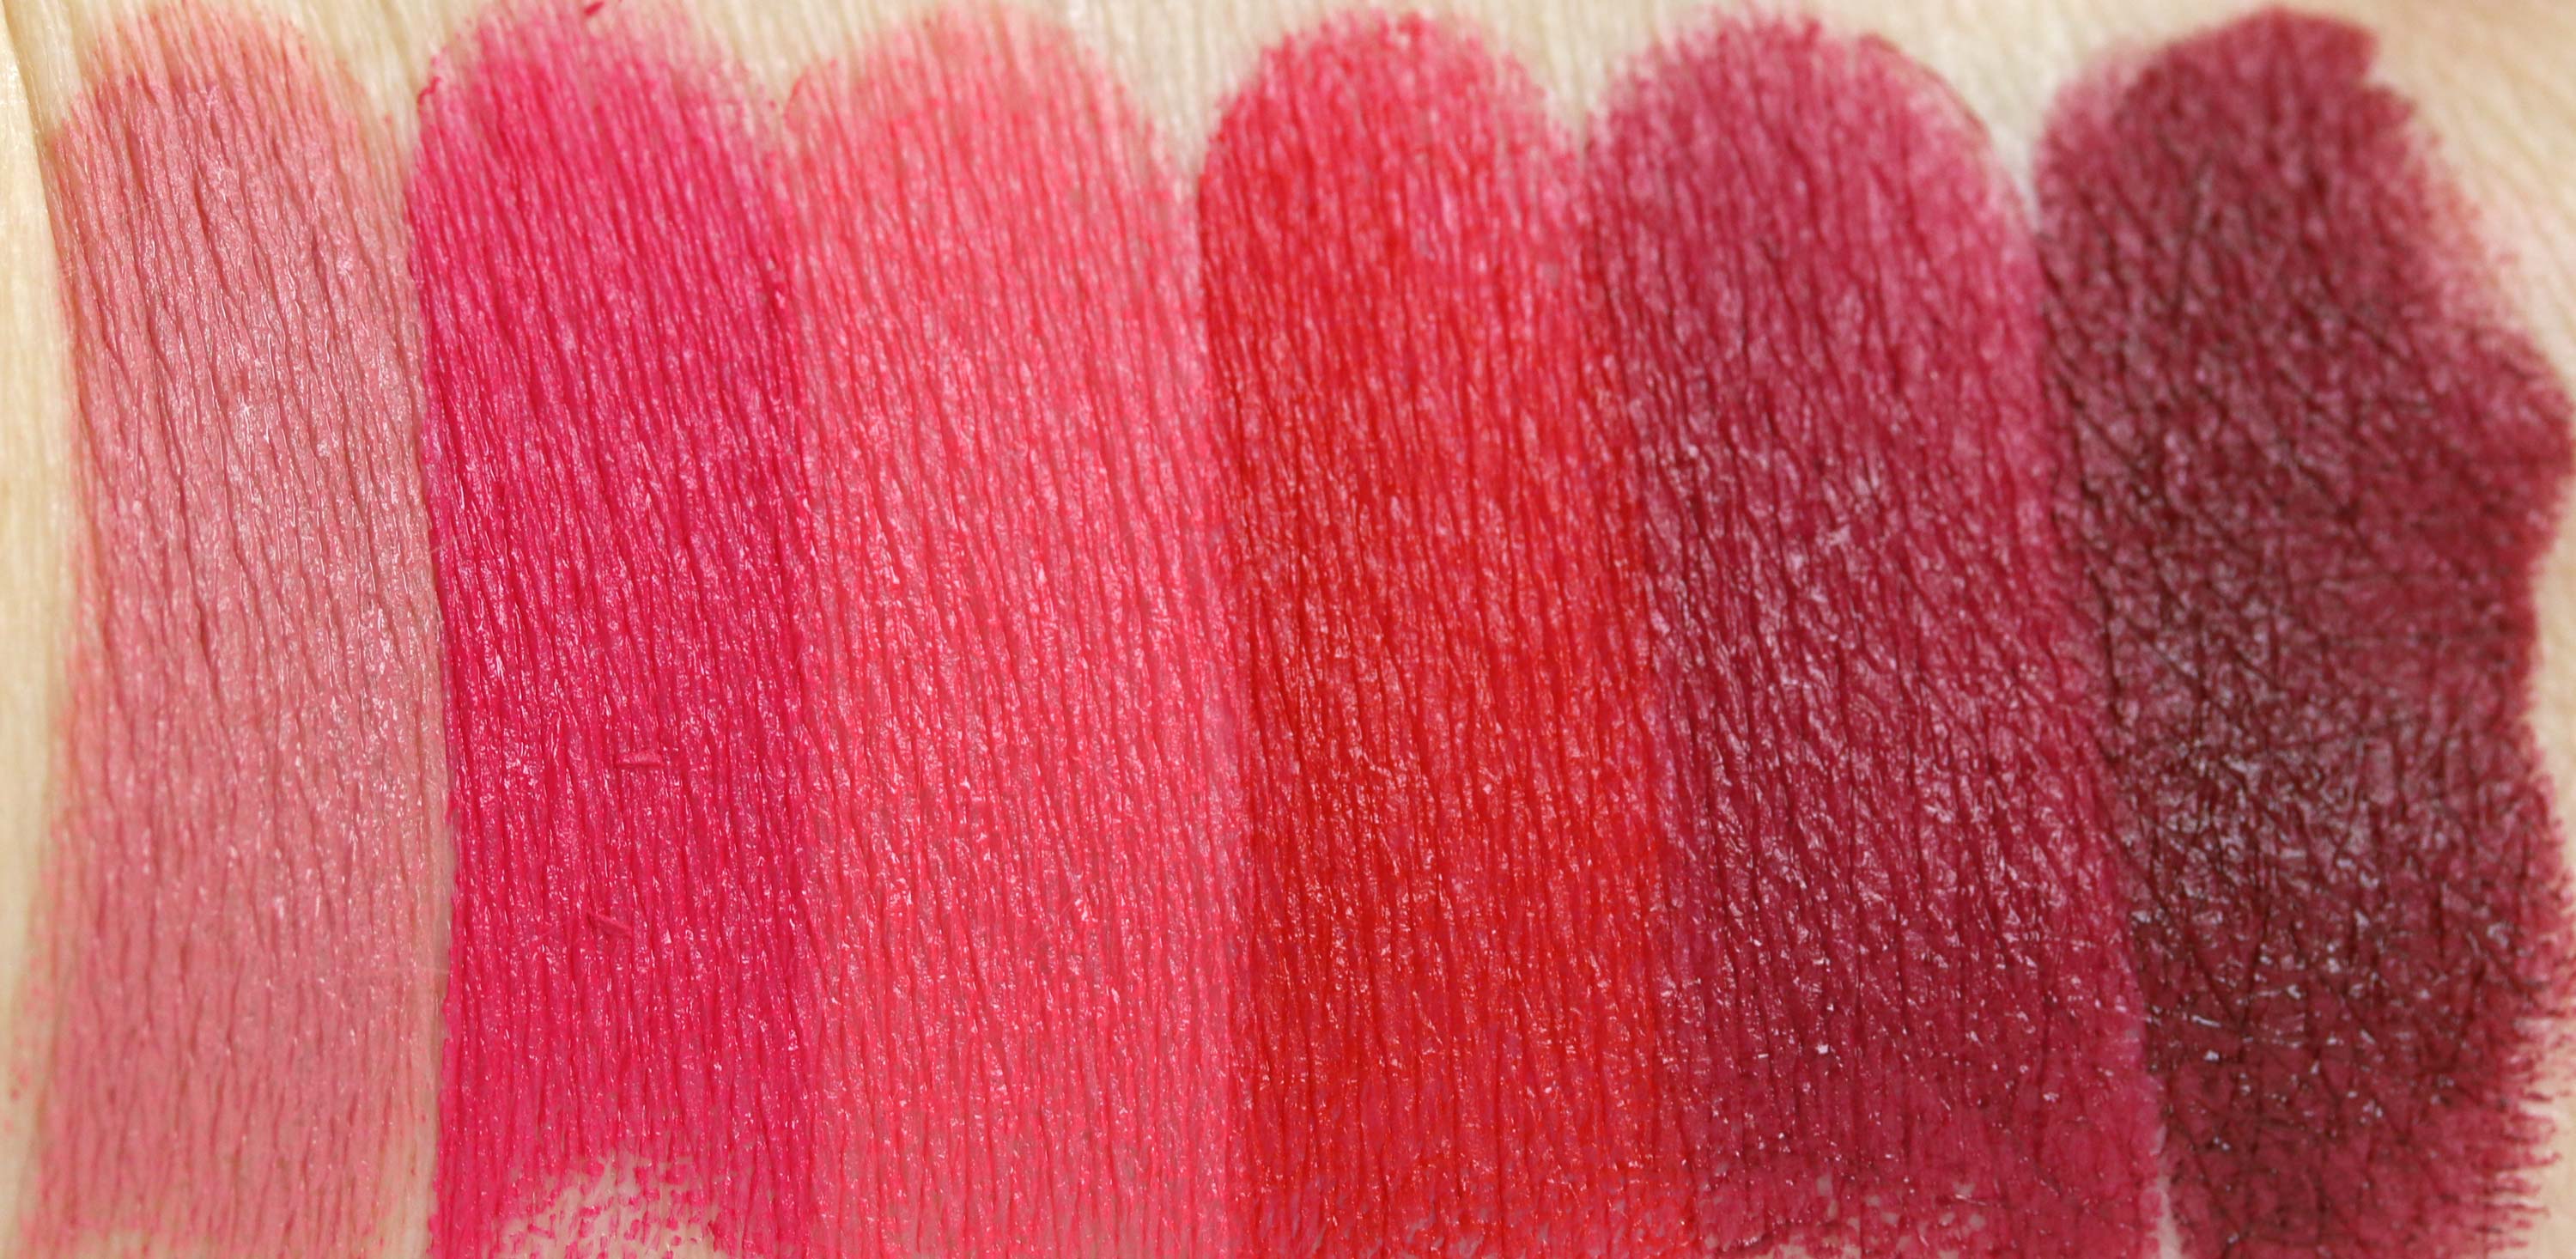 astor-perfect-stay-matte-lipstick-swatches